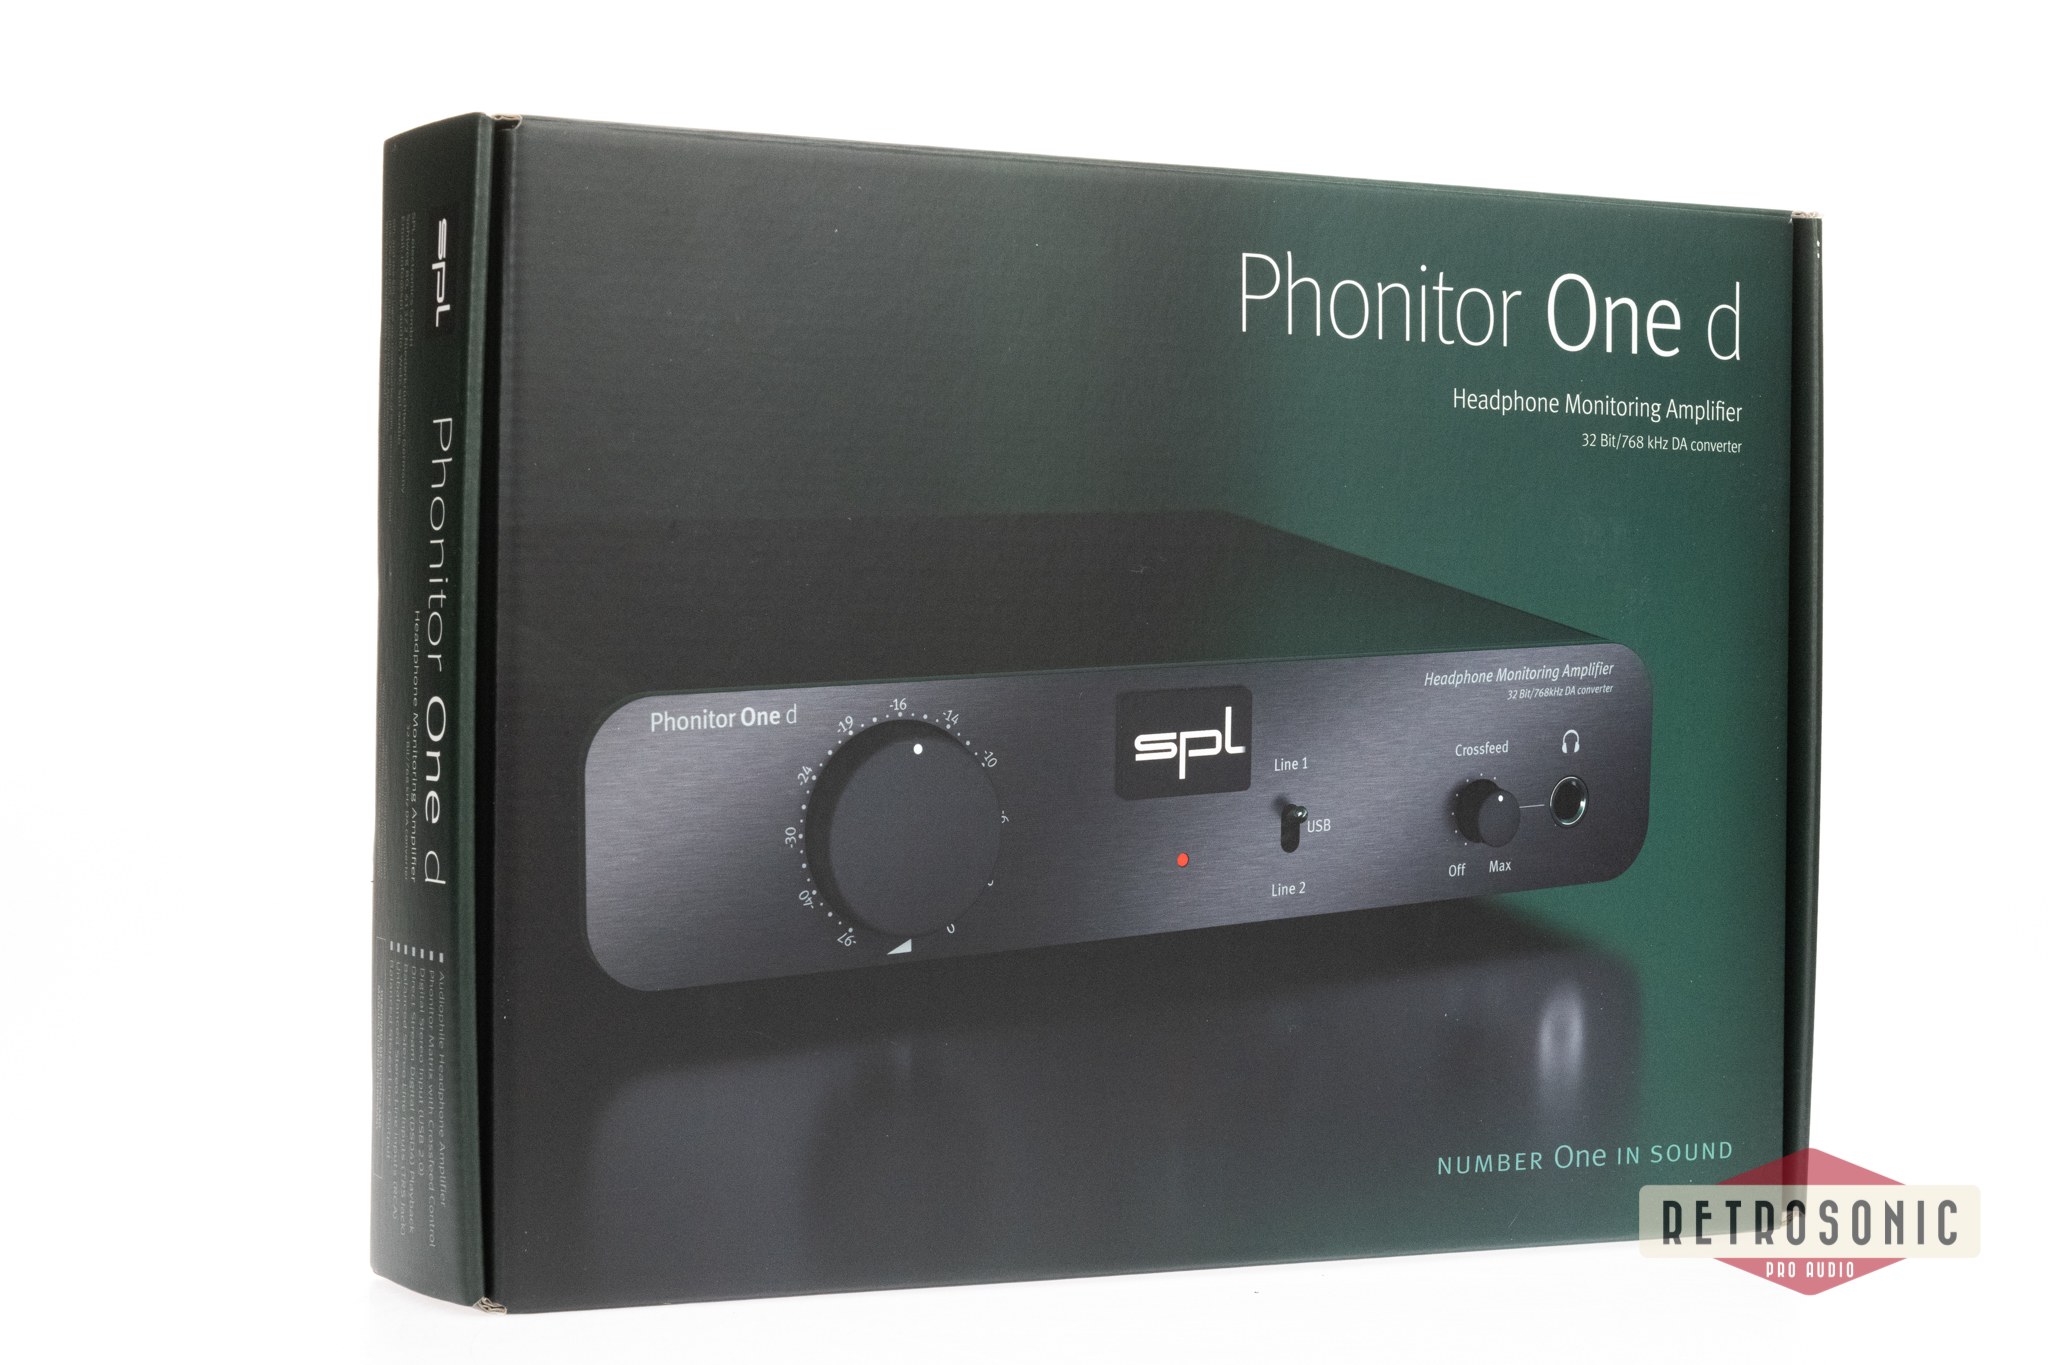 SPL Phonitor One d